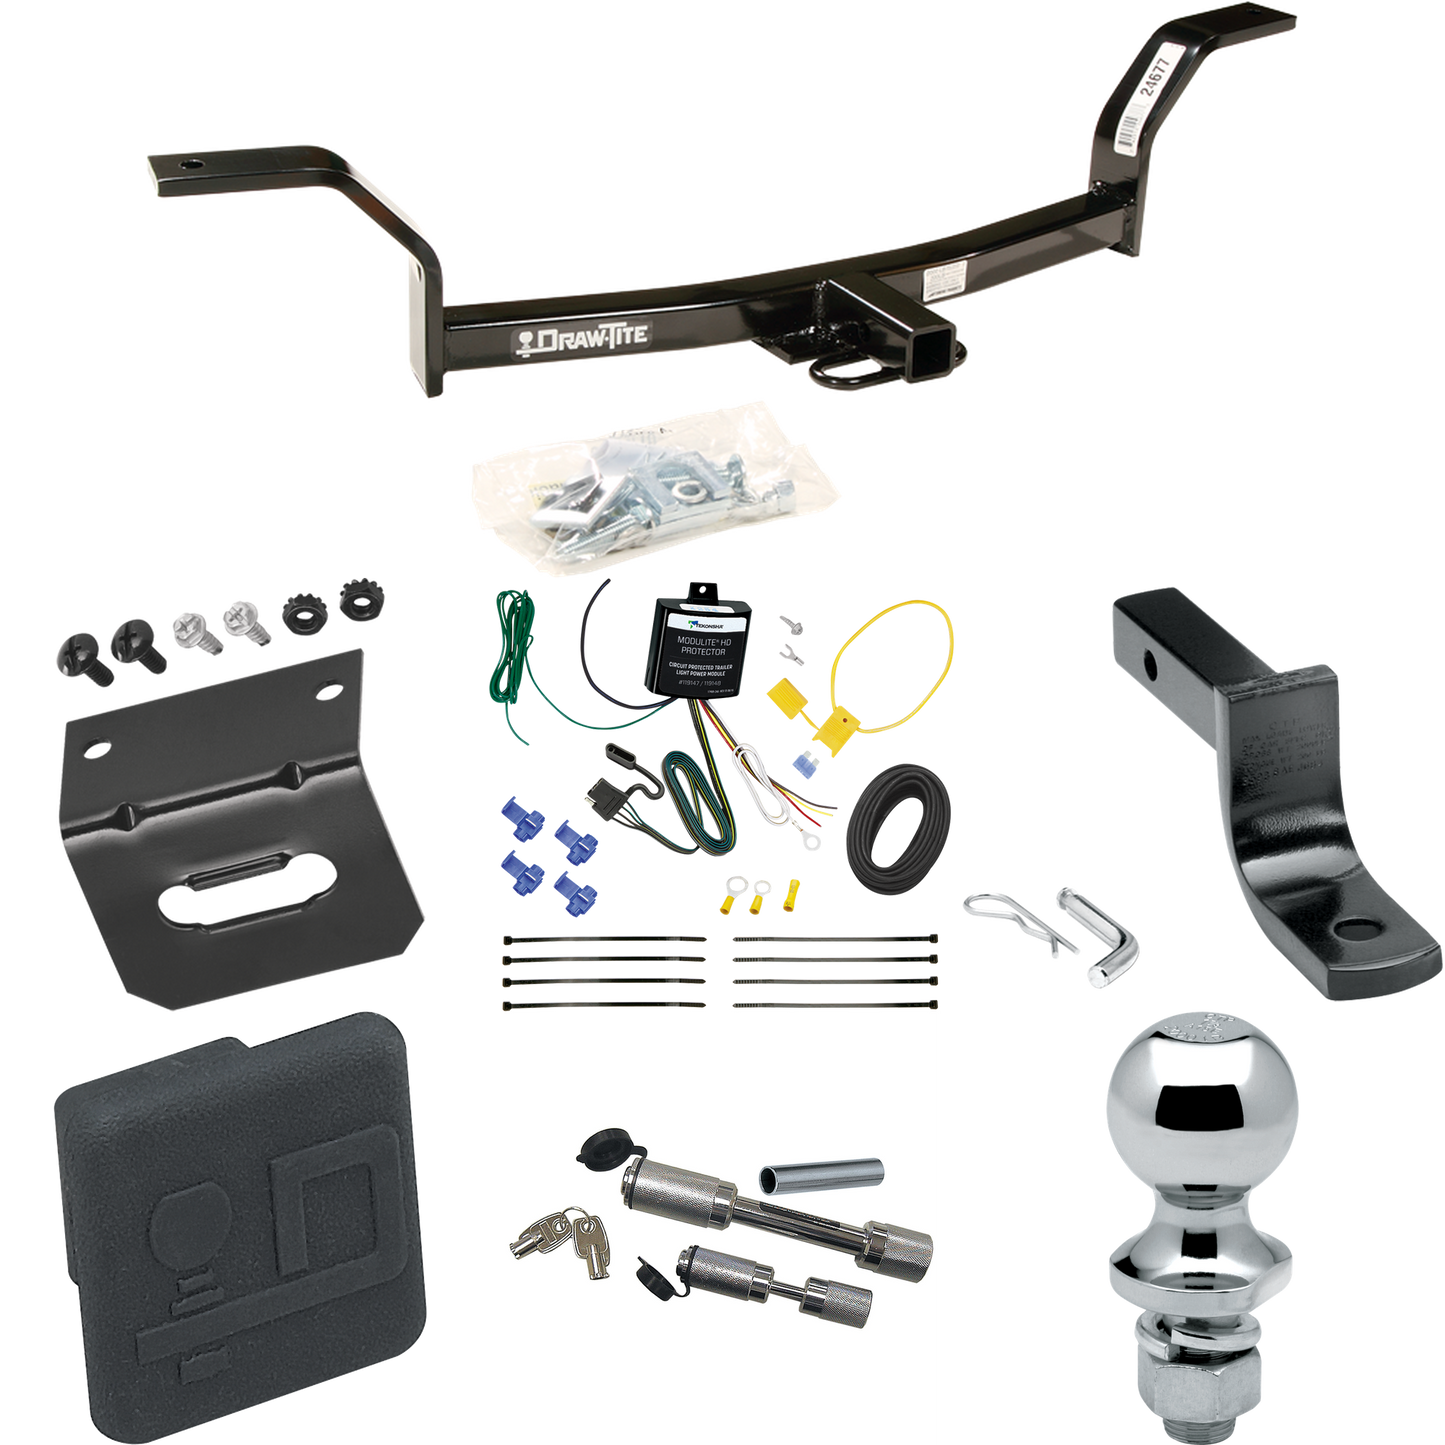 Fits 1992-2000 Honda Civic Trailer Hitch Tow PKG w/ 4-Flat Wiring Harness + Draw-Bar + 1-7/8" Ball + Wiring Bracket + Hitch Cover + Dual Hitch & Coupler Locks By Draw-Tite